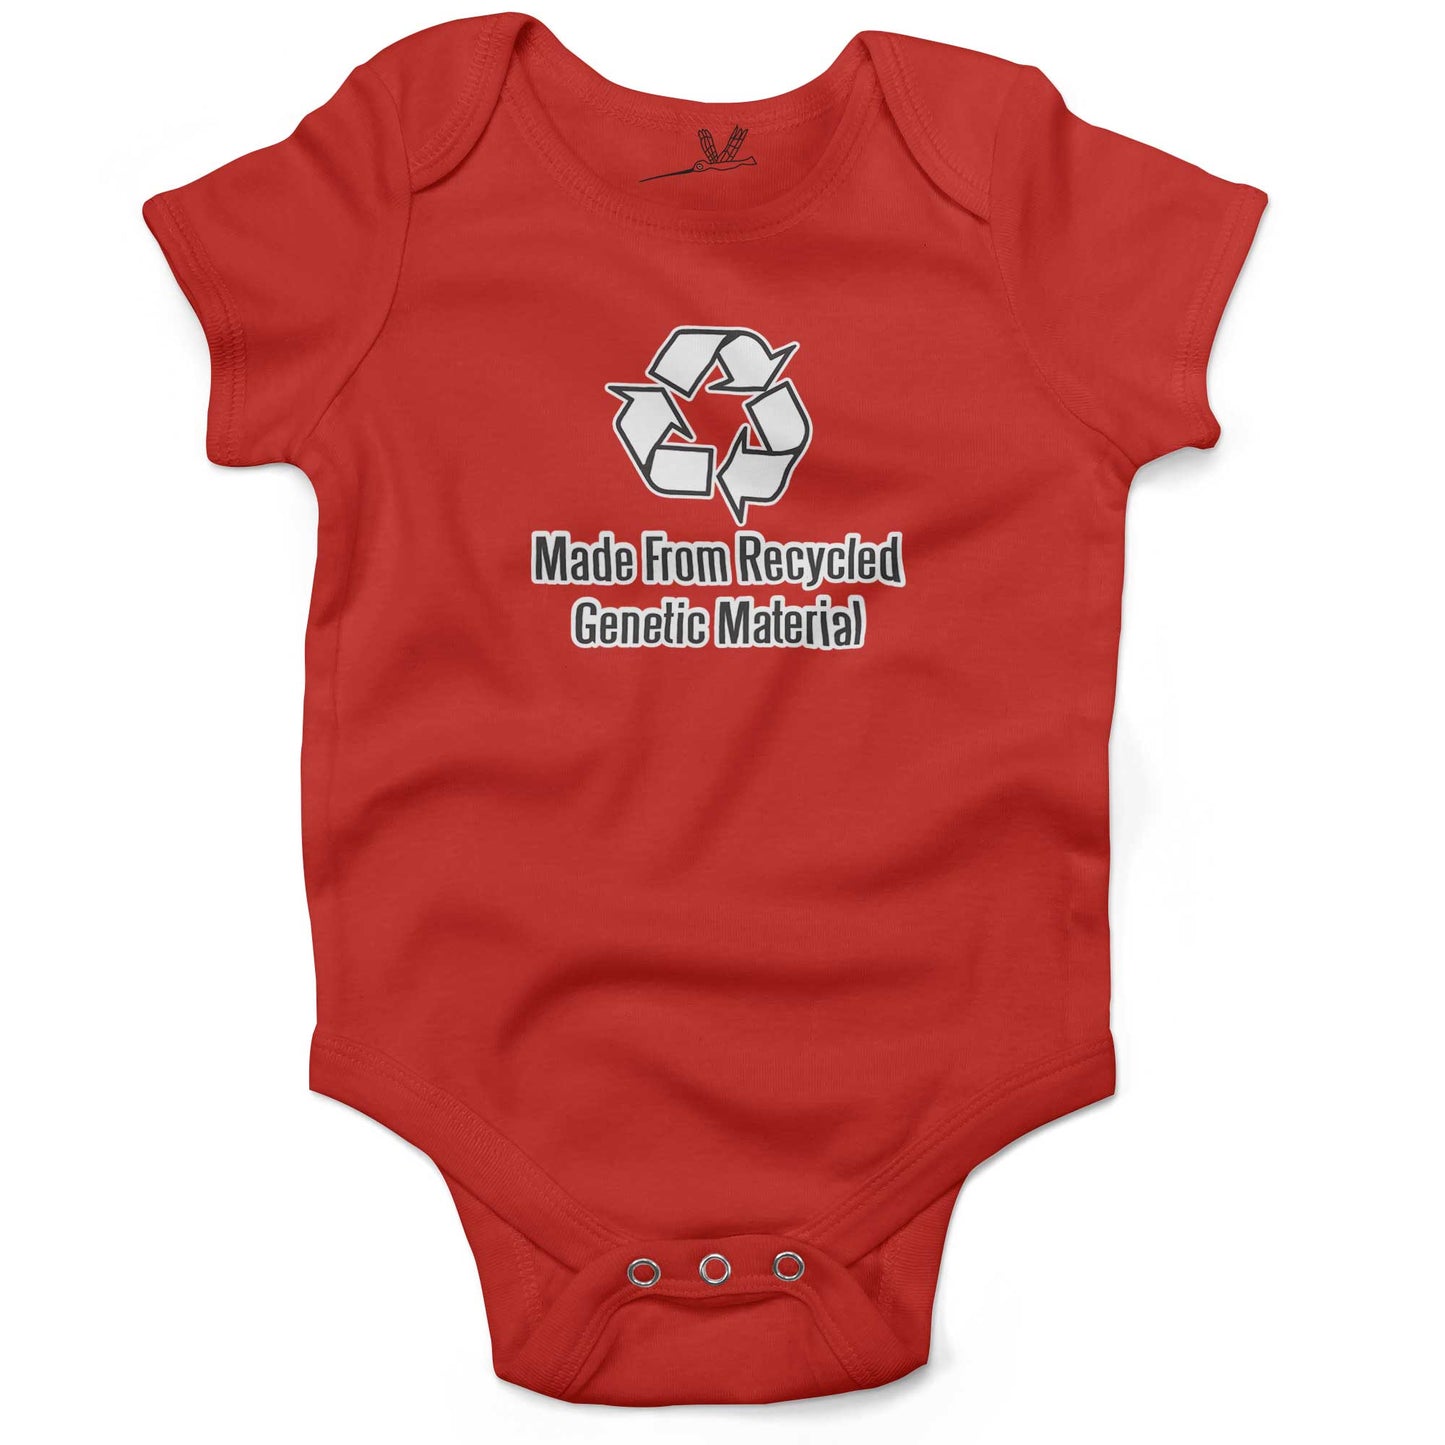 Made From Recycled Materials Infant Bodysuit or Raglan Baby Tee-Organic Red-3-6 months